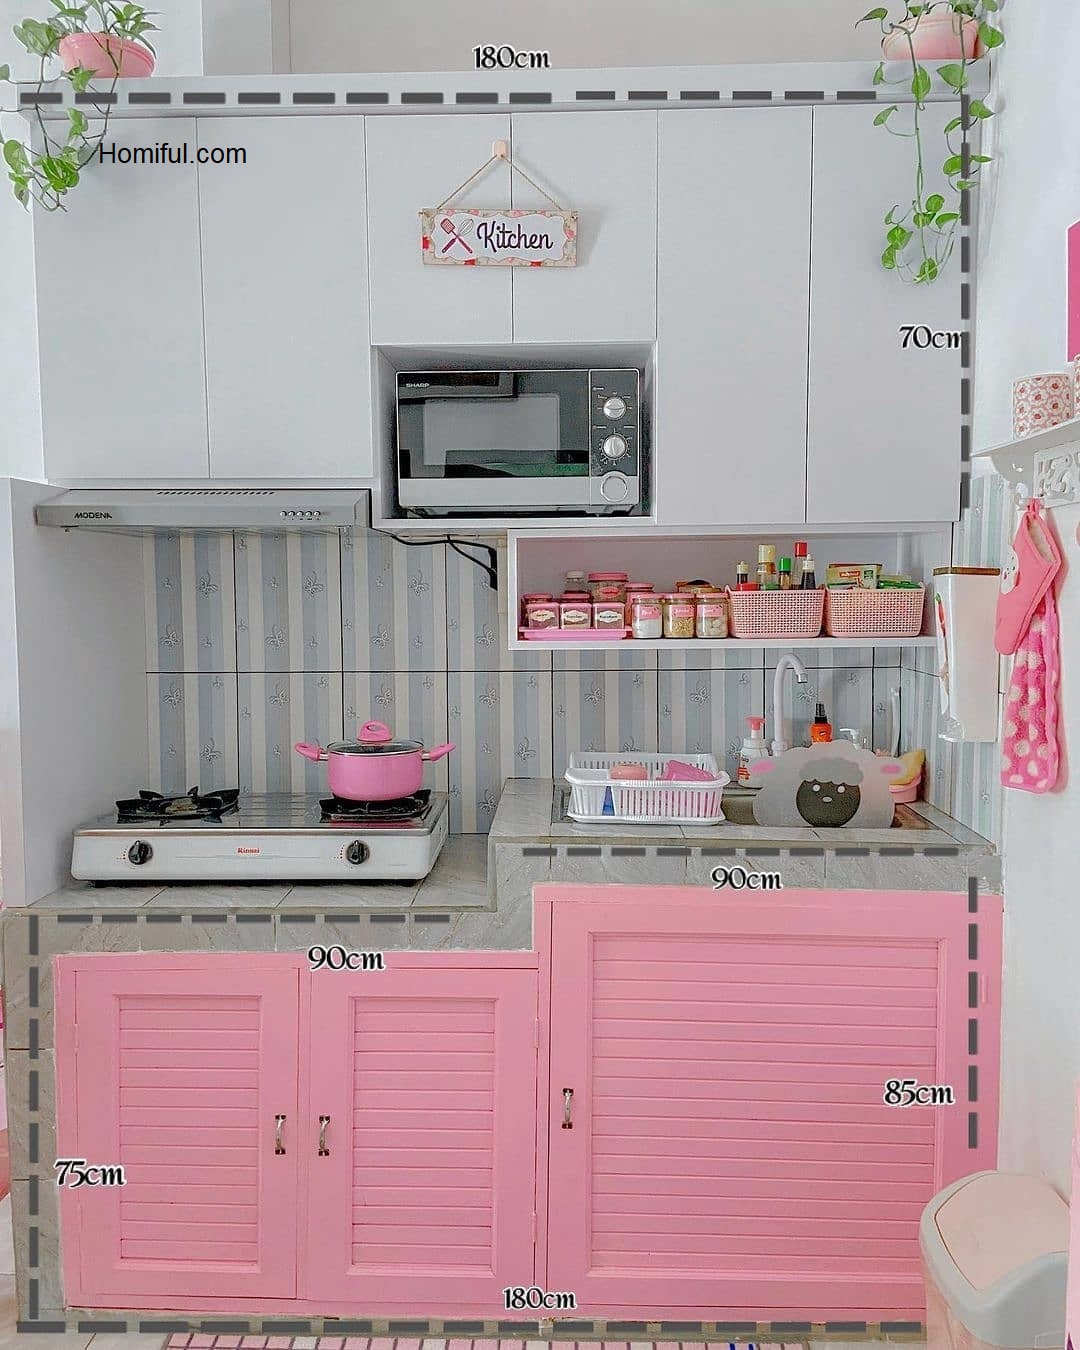 18 Cute And Cozy Kitchen For Girls Ideas ~ Homiful.com   Design ...